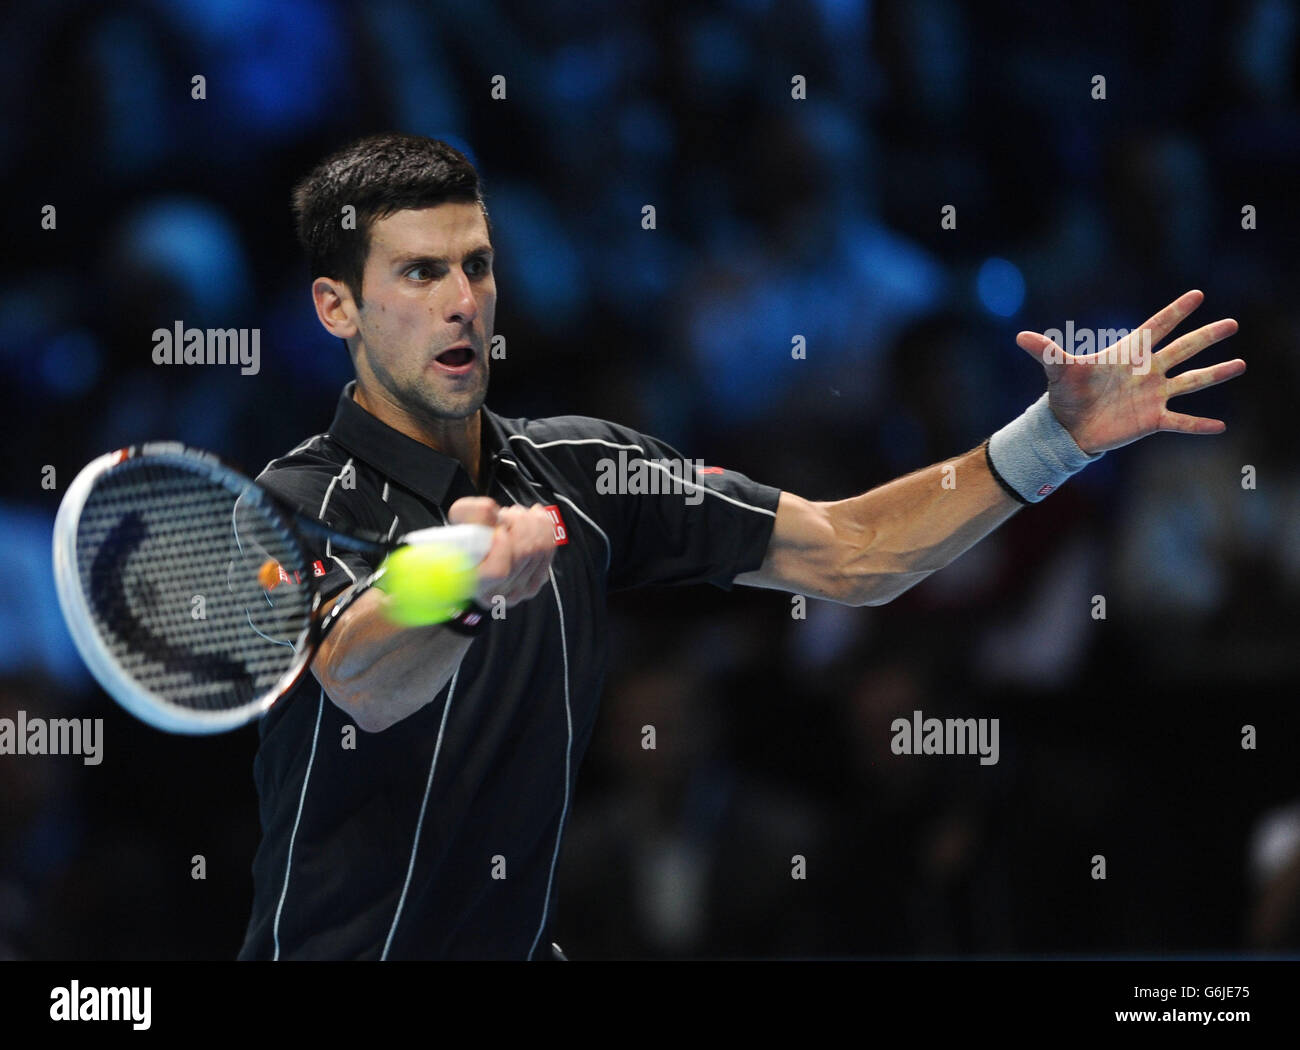 Serbia's Novak Djokovic in action against Spain's Rafael Nadal during day eight of the Barclays ATP World Tour Finals at the O2 Arena, London. PRESS ASSOCIATION Photo. Picture date: Monday November 11, 2013. See PA story TENNIS London. Photo credit should read: Adam Davy/PA Wire Stock Photo